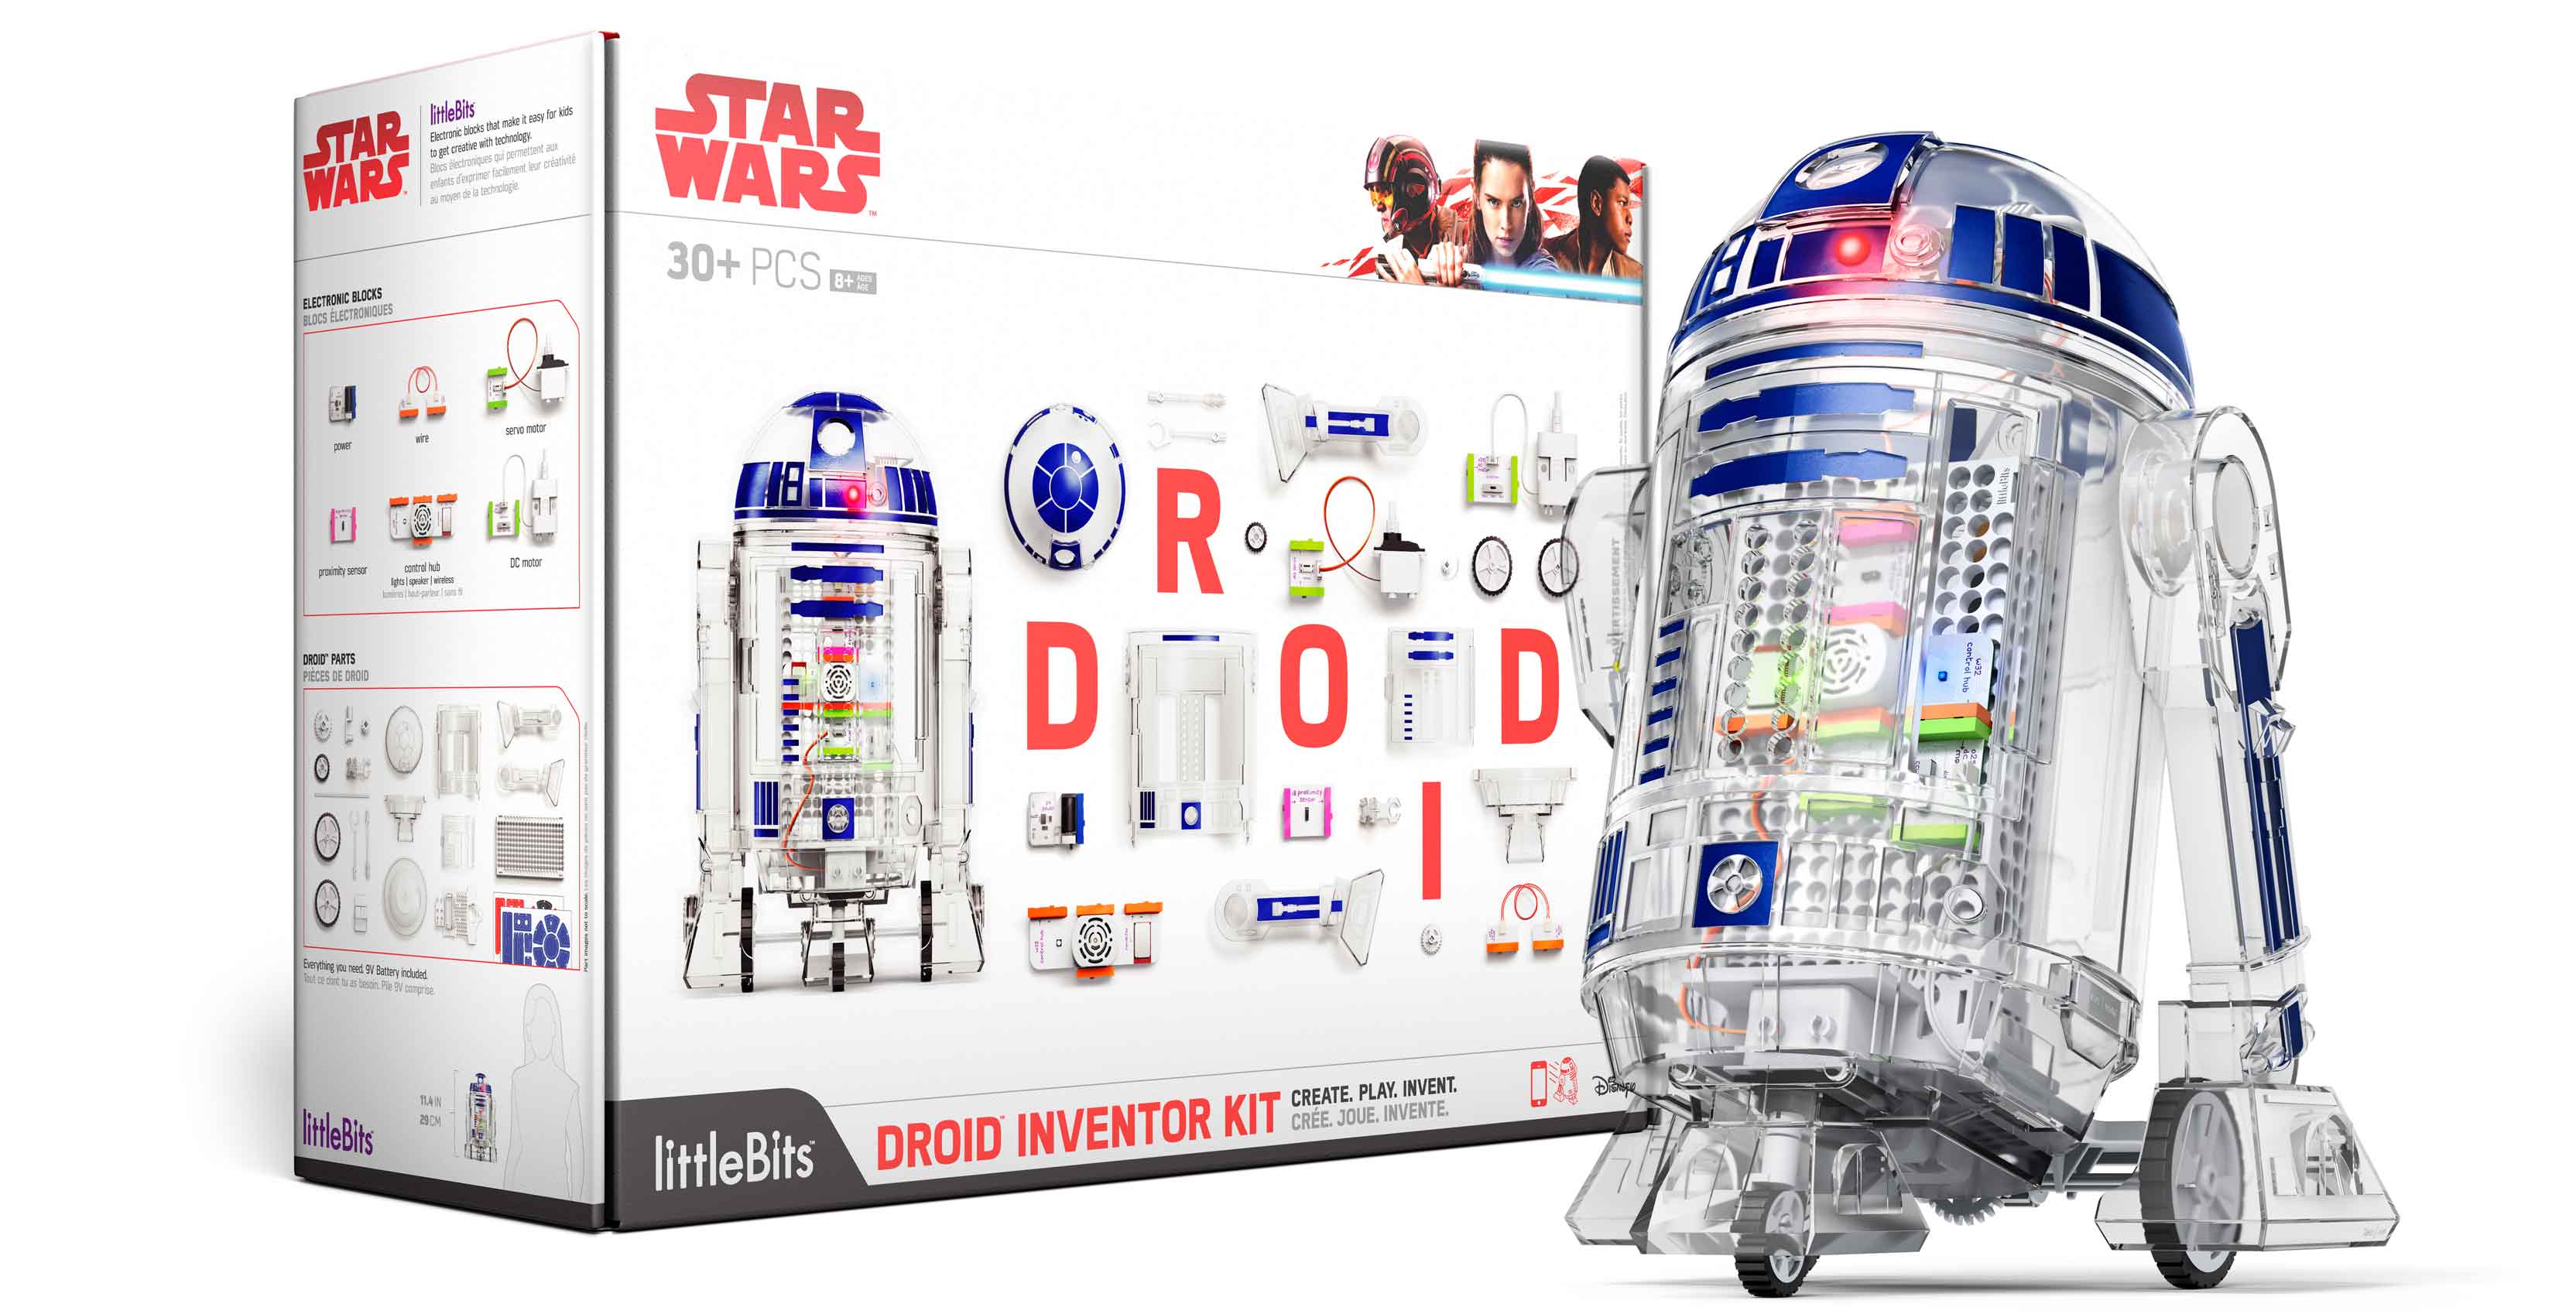 An image showing the Droid Inventor Kit box and completed droid